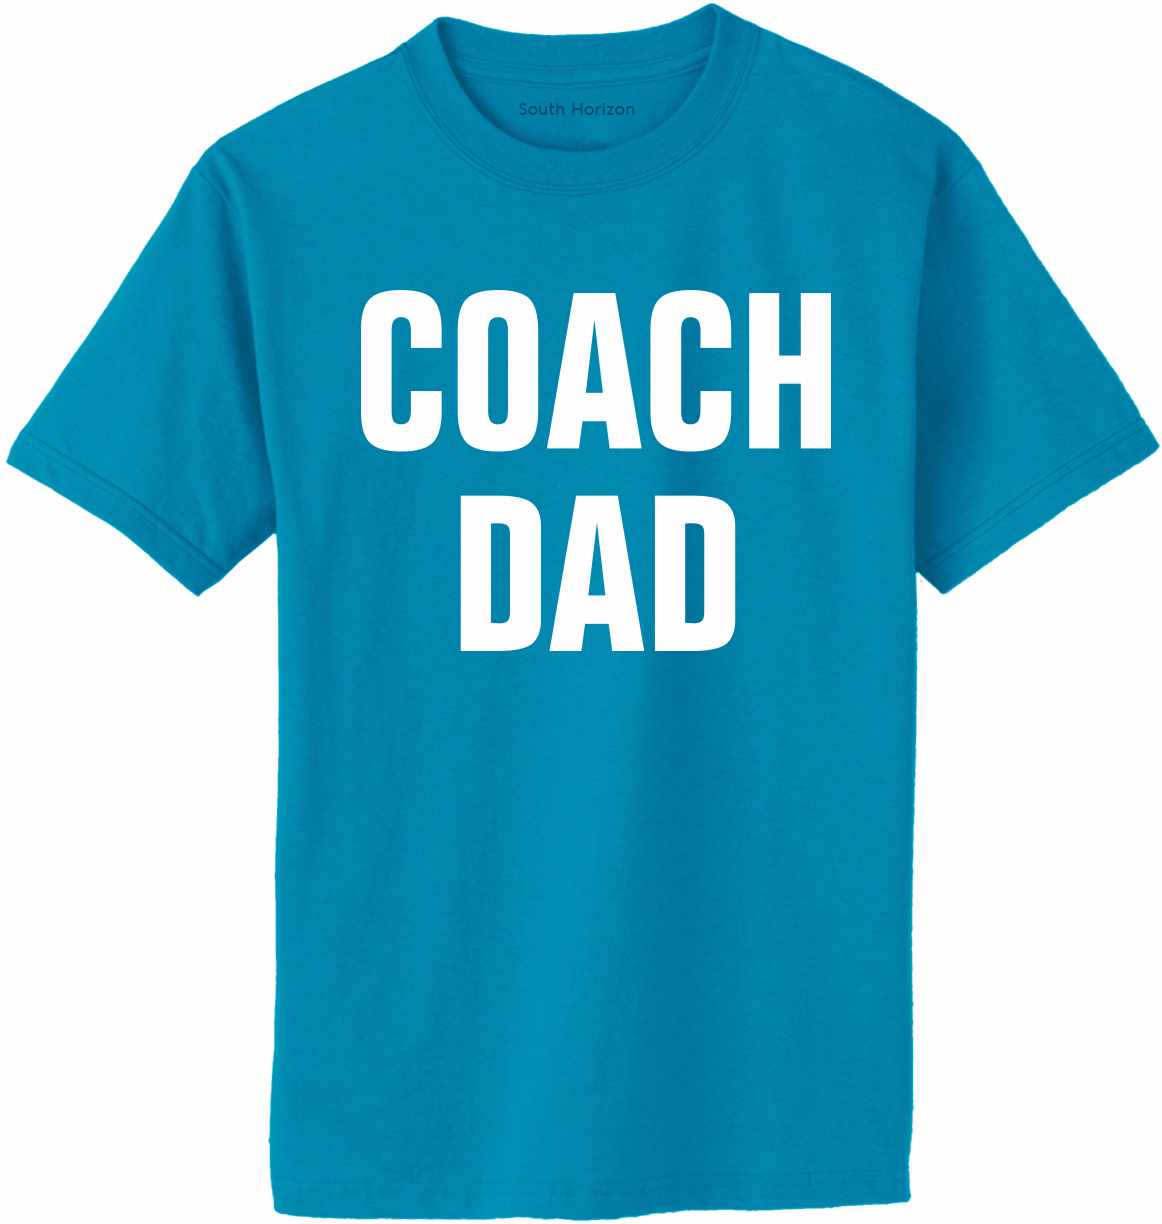 Coach Dad on Adult T-Shirt (#1212-1)